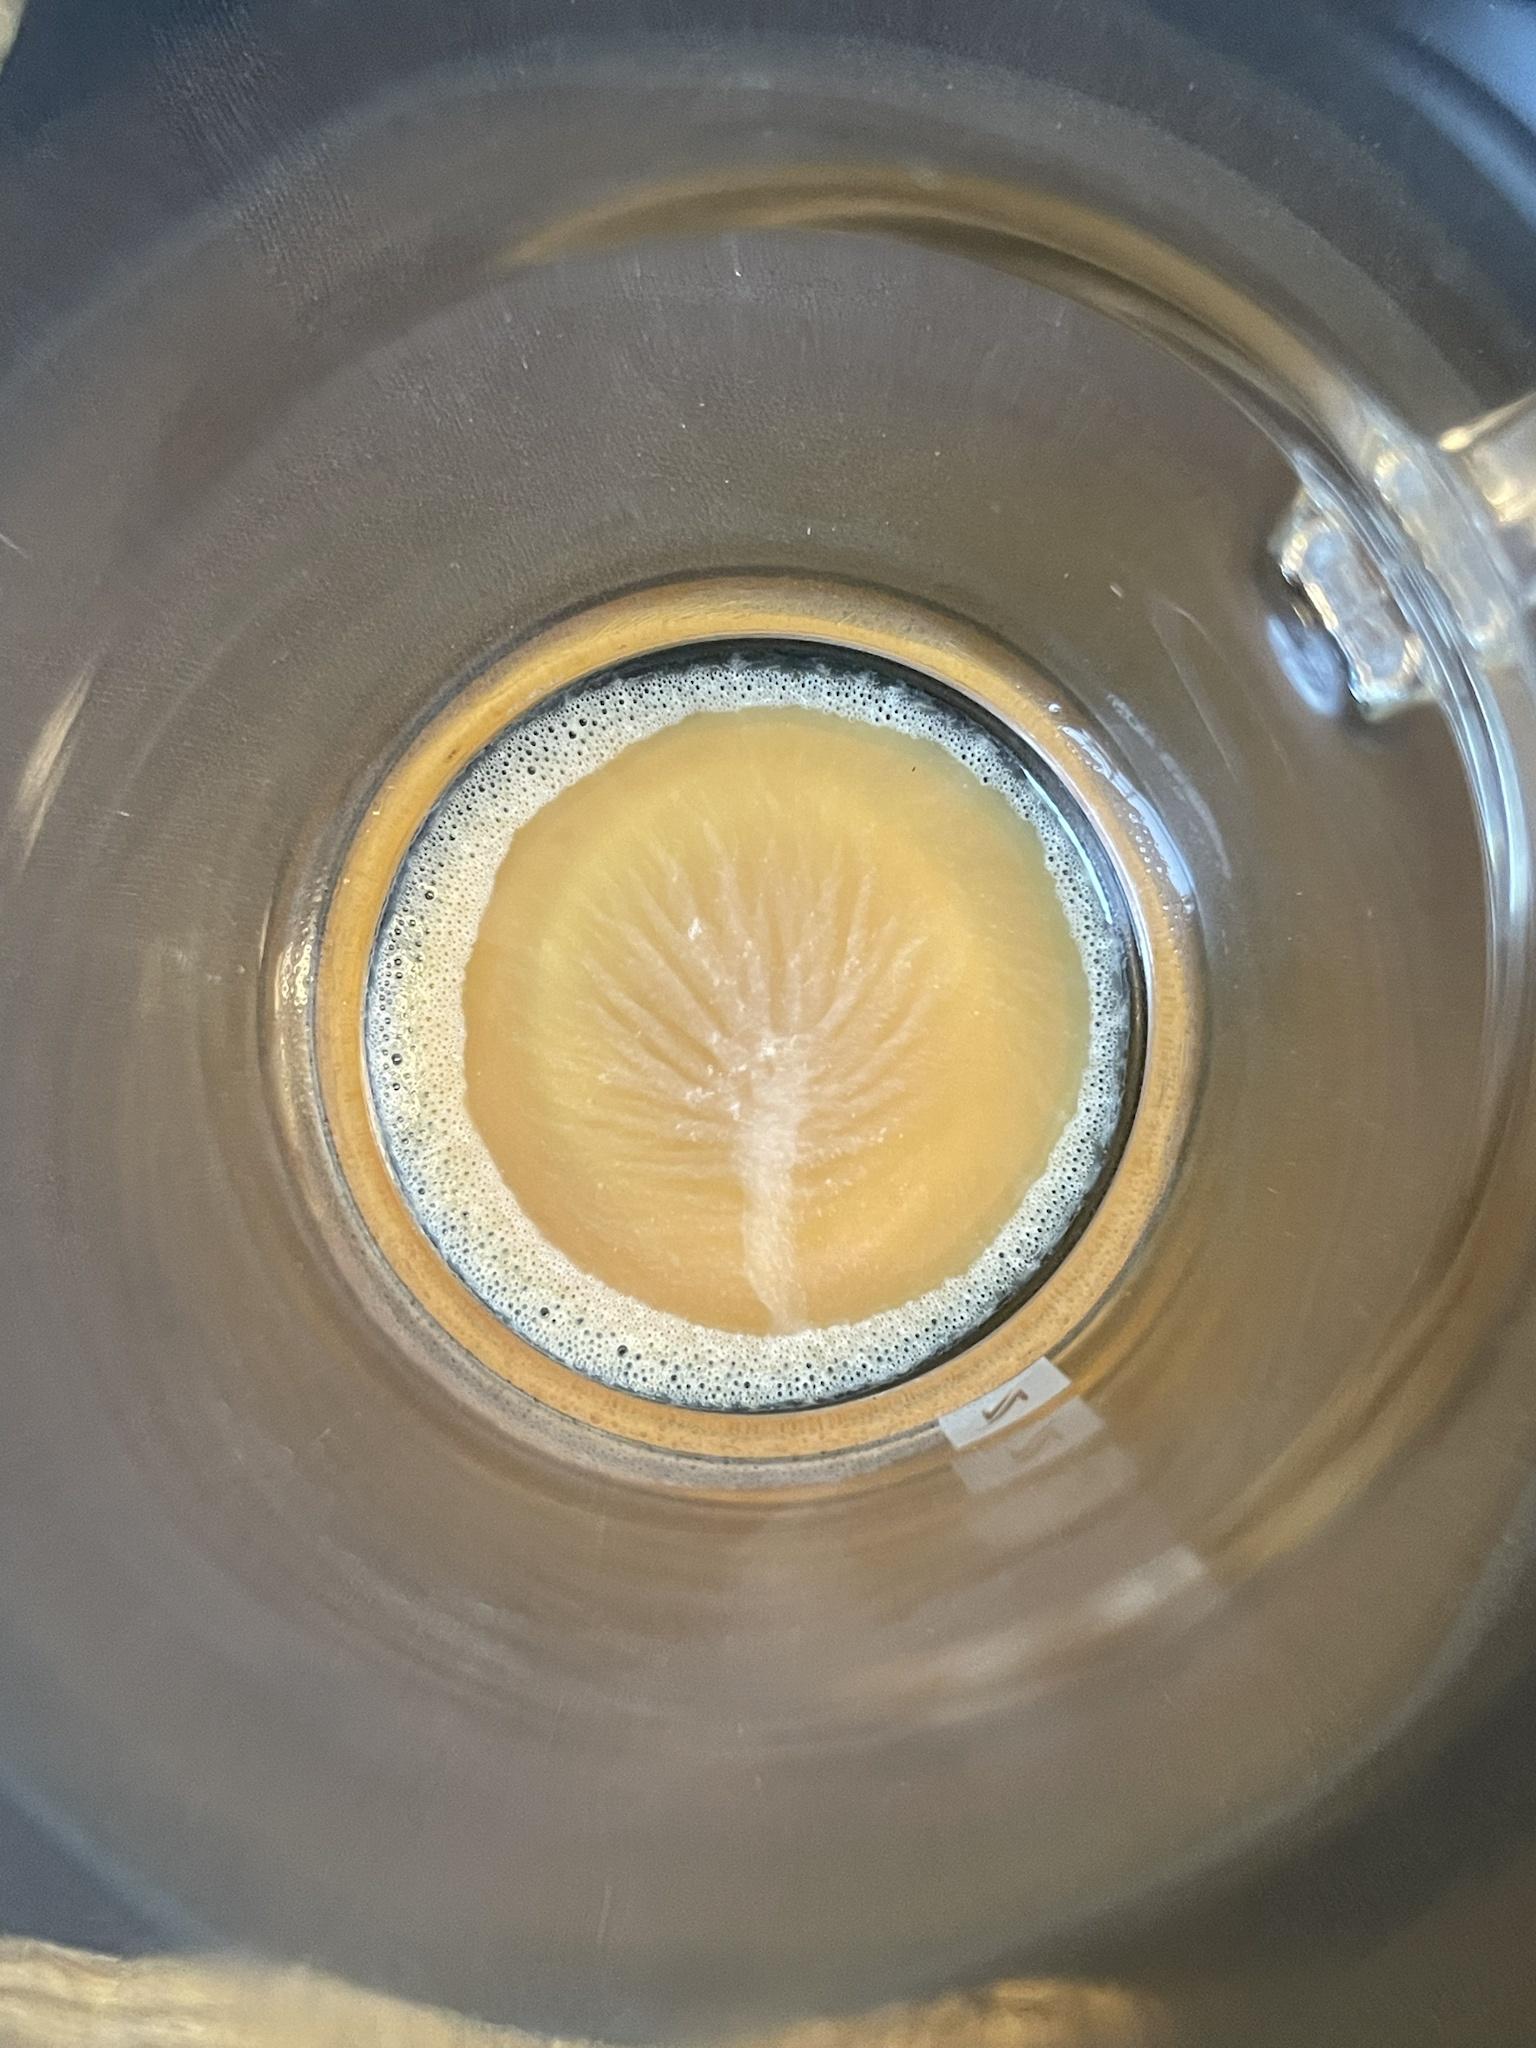 Bottom of my espresso cup made a snow lined tree